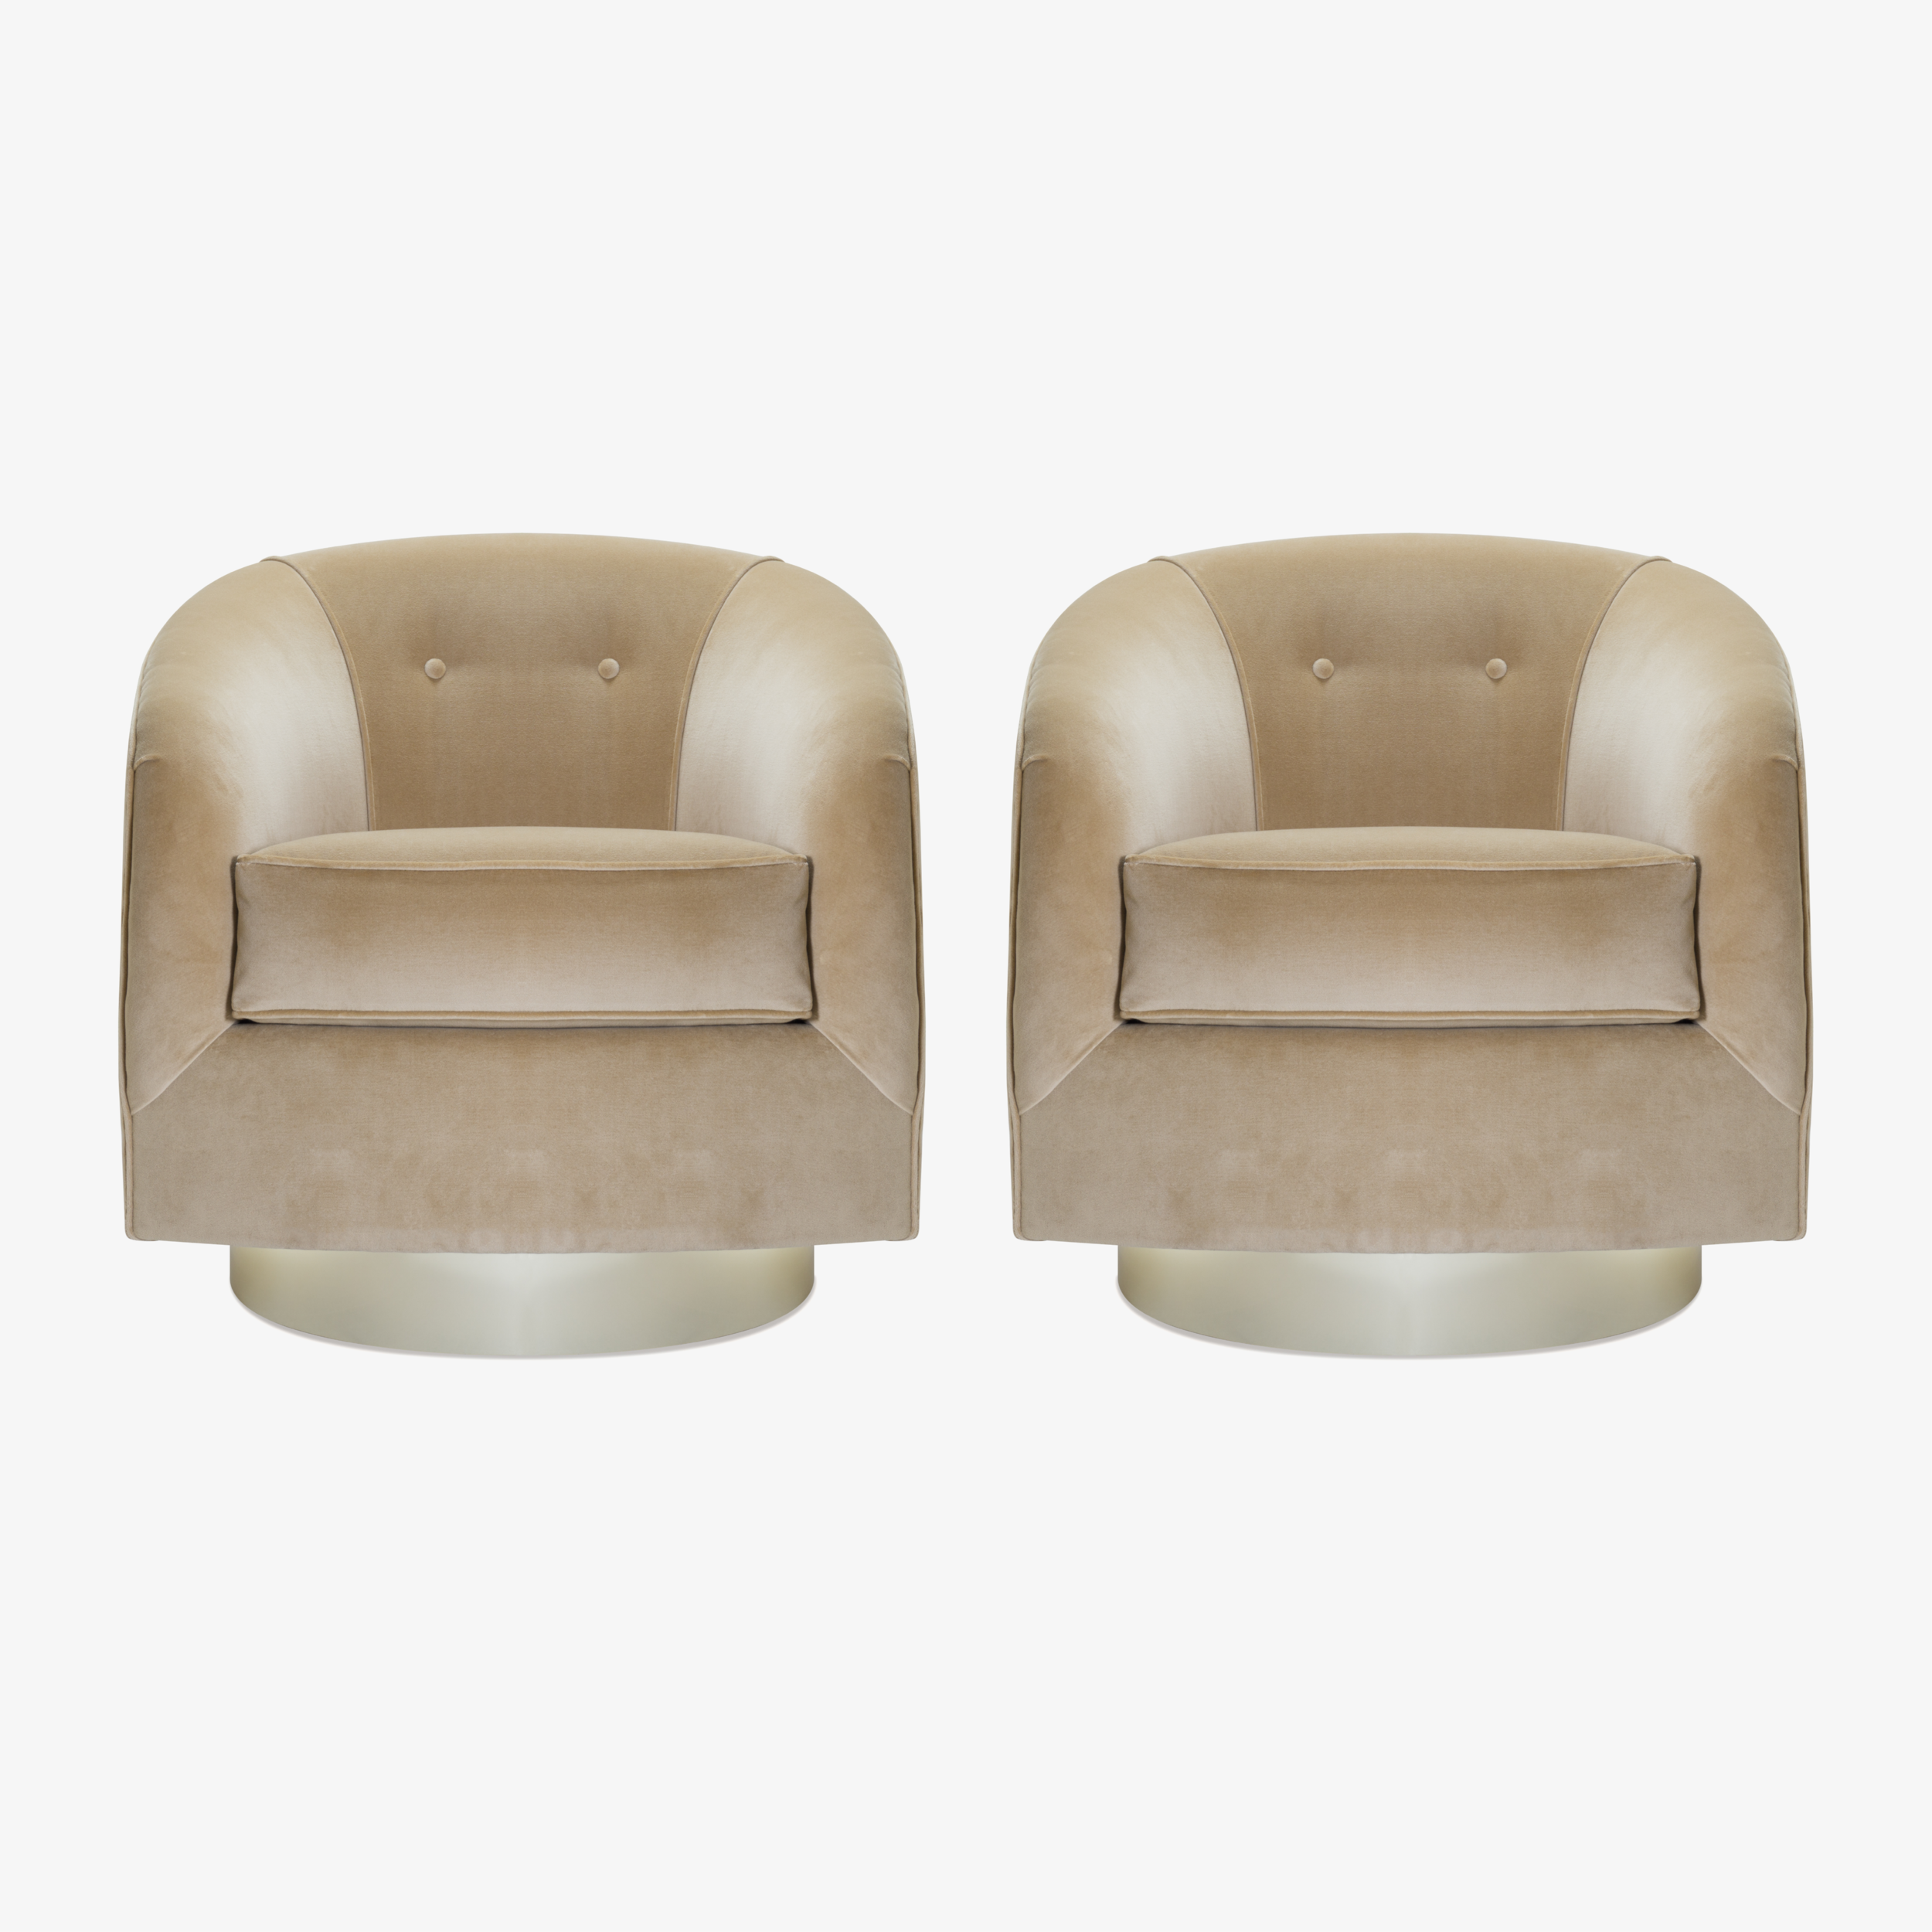 Swivel Tub Chairs with Brass Bases in Camel Velvet.png